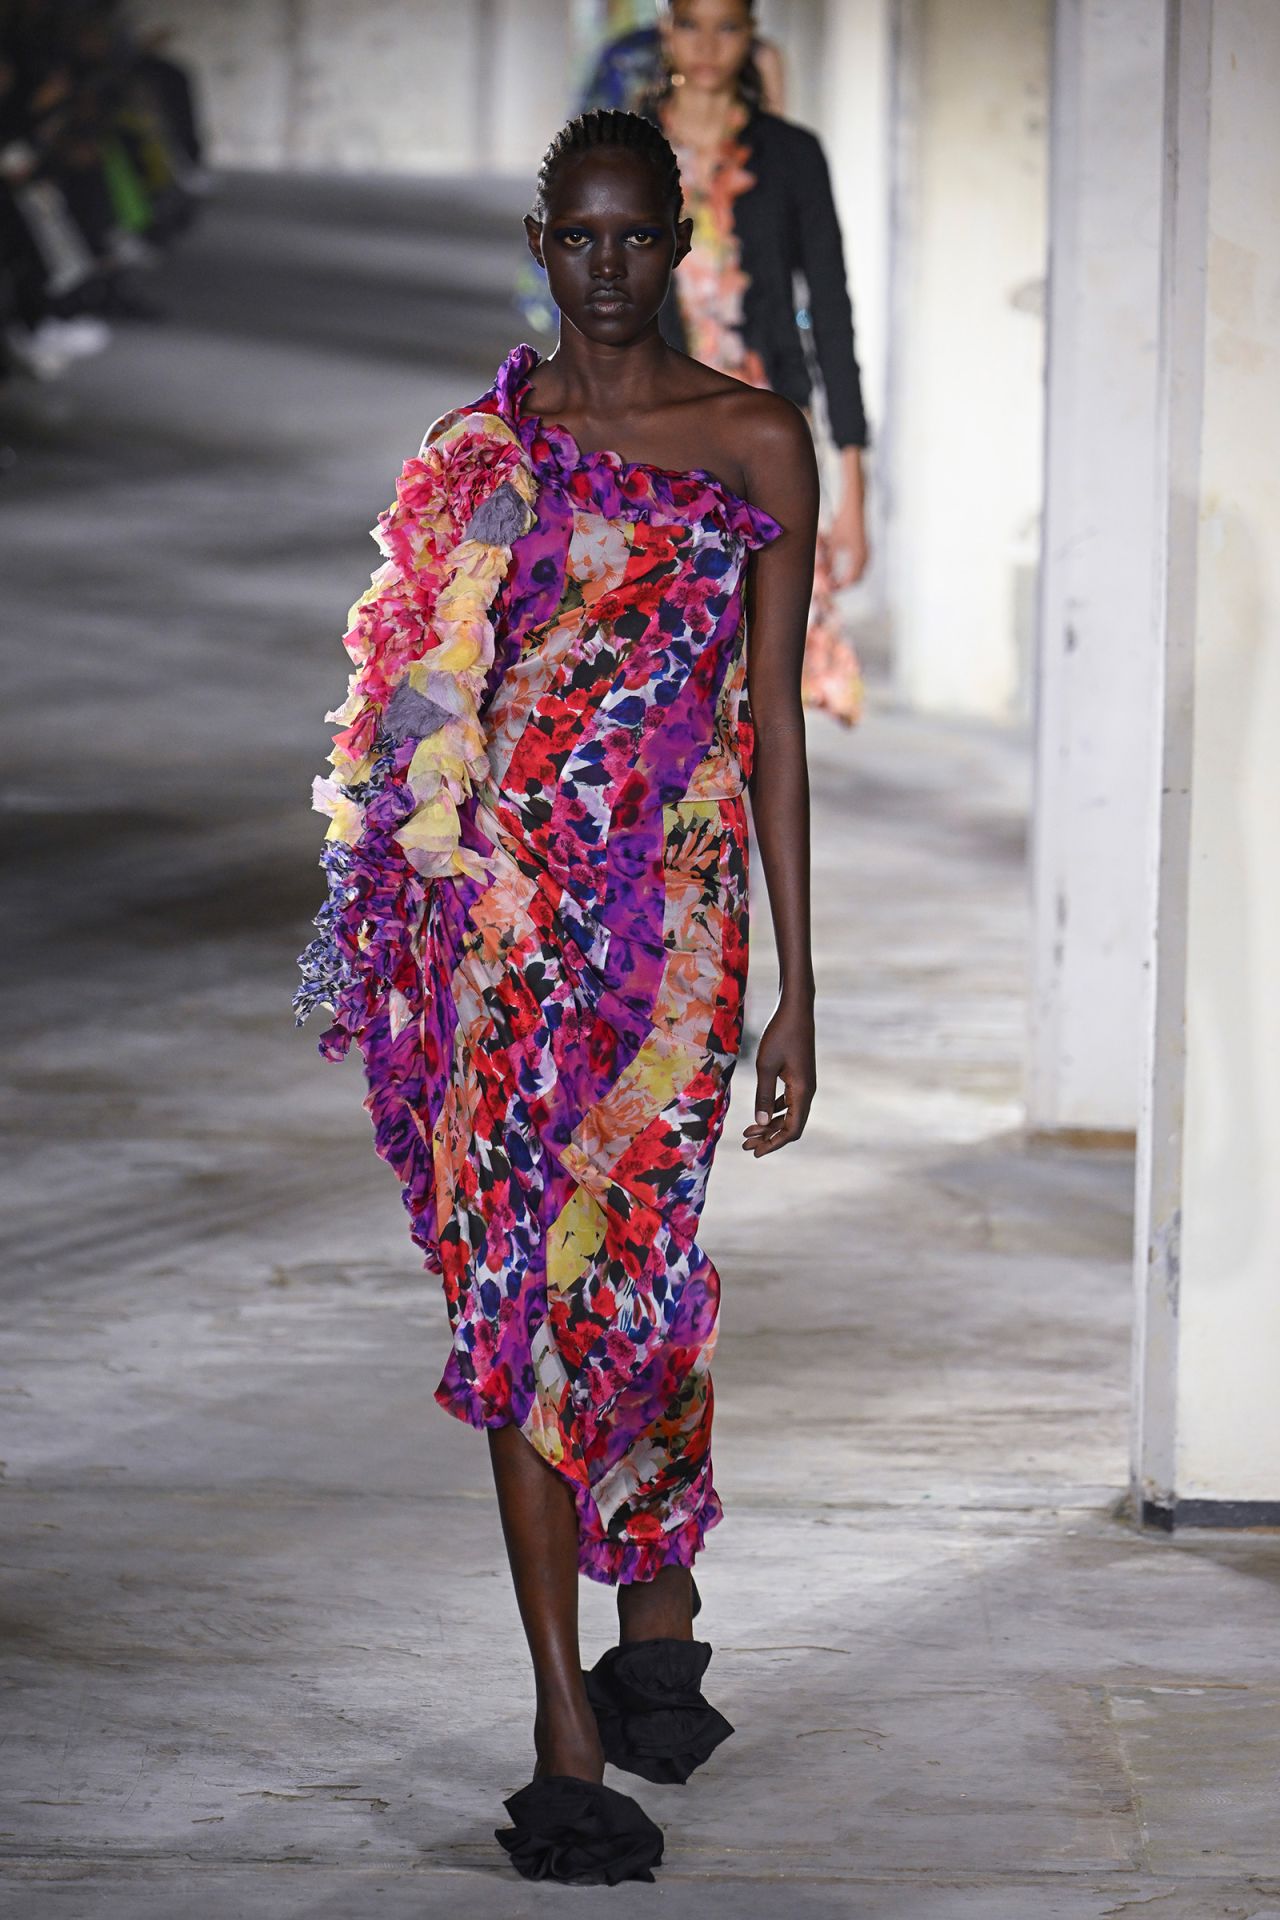 The collection's climax was a series of bright floral pieces.